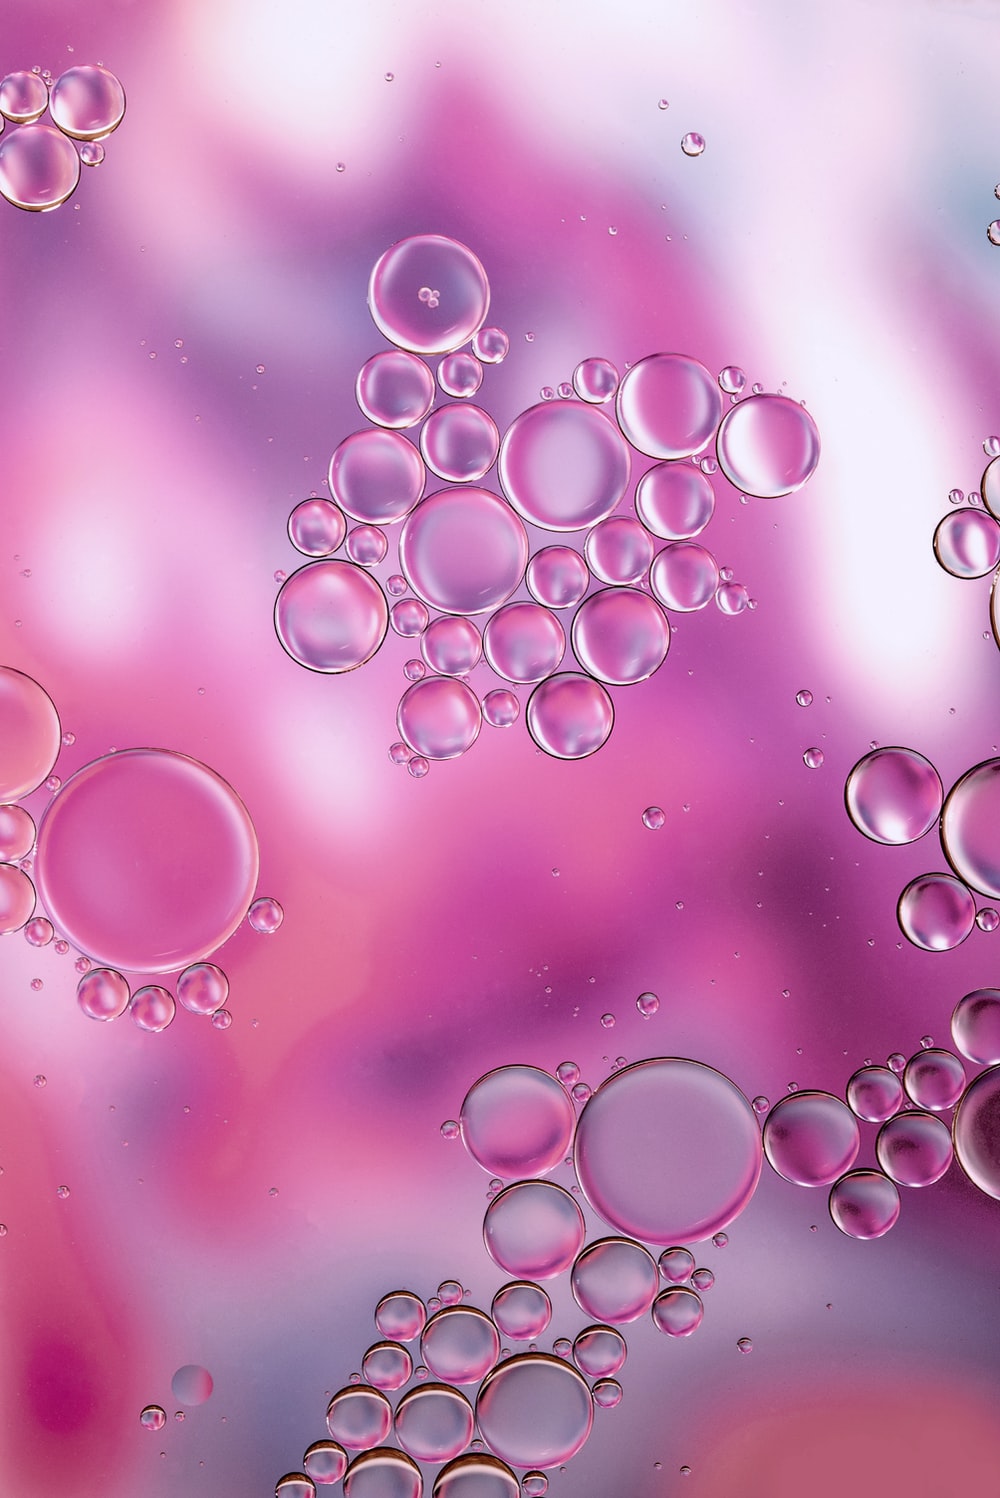 Colourful Bubble Picture [HD]. Download Free Image